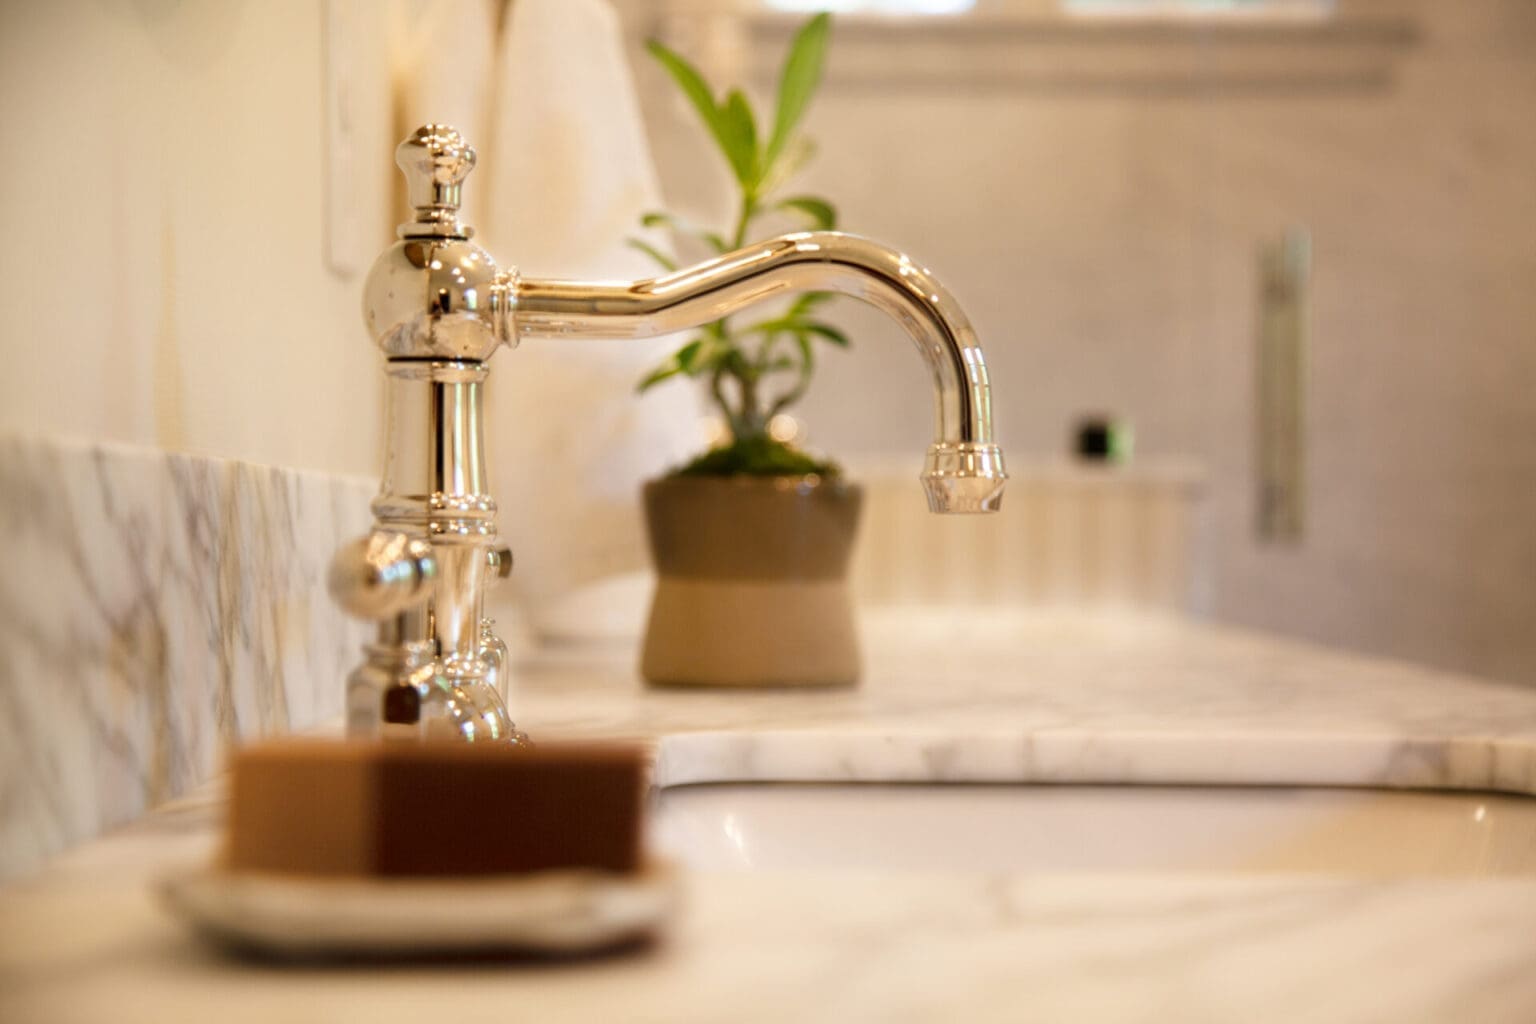 A photo of a traditional silver faucet in a bathroom with marble countertops,